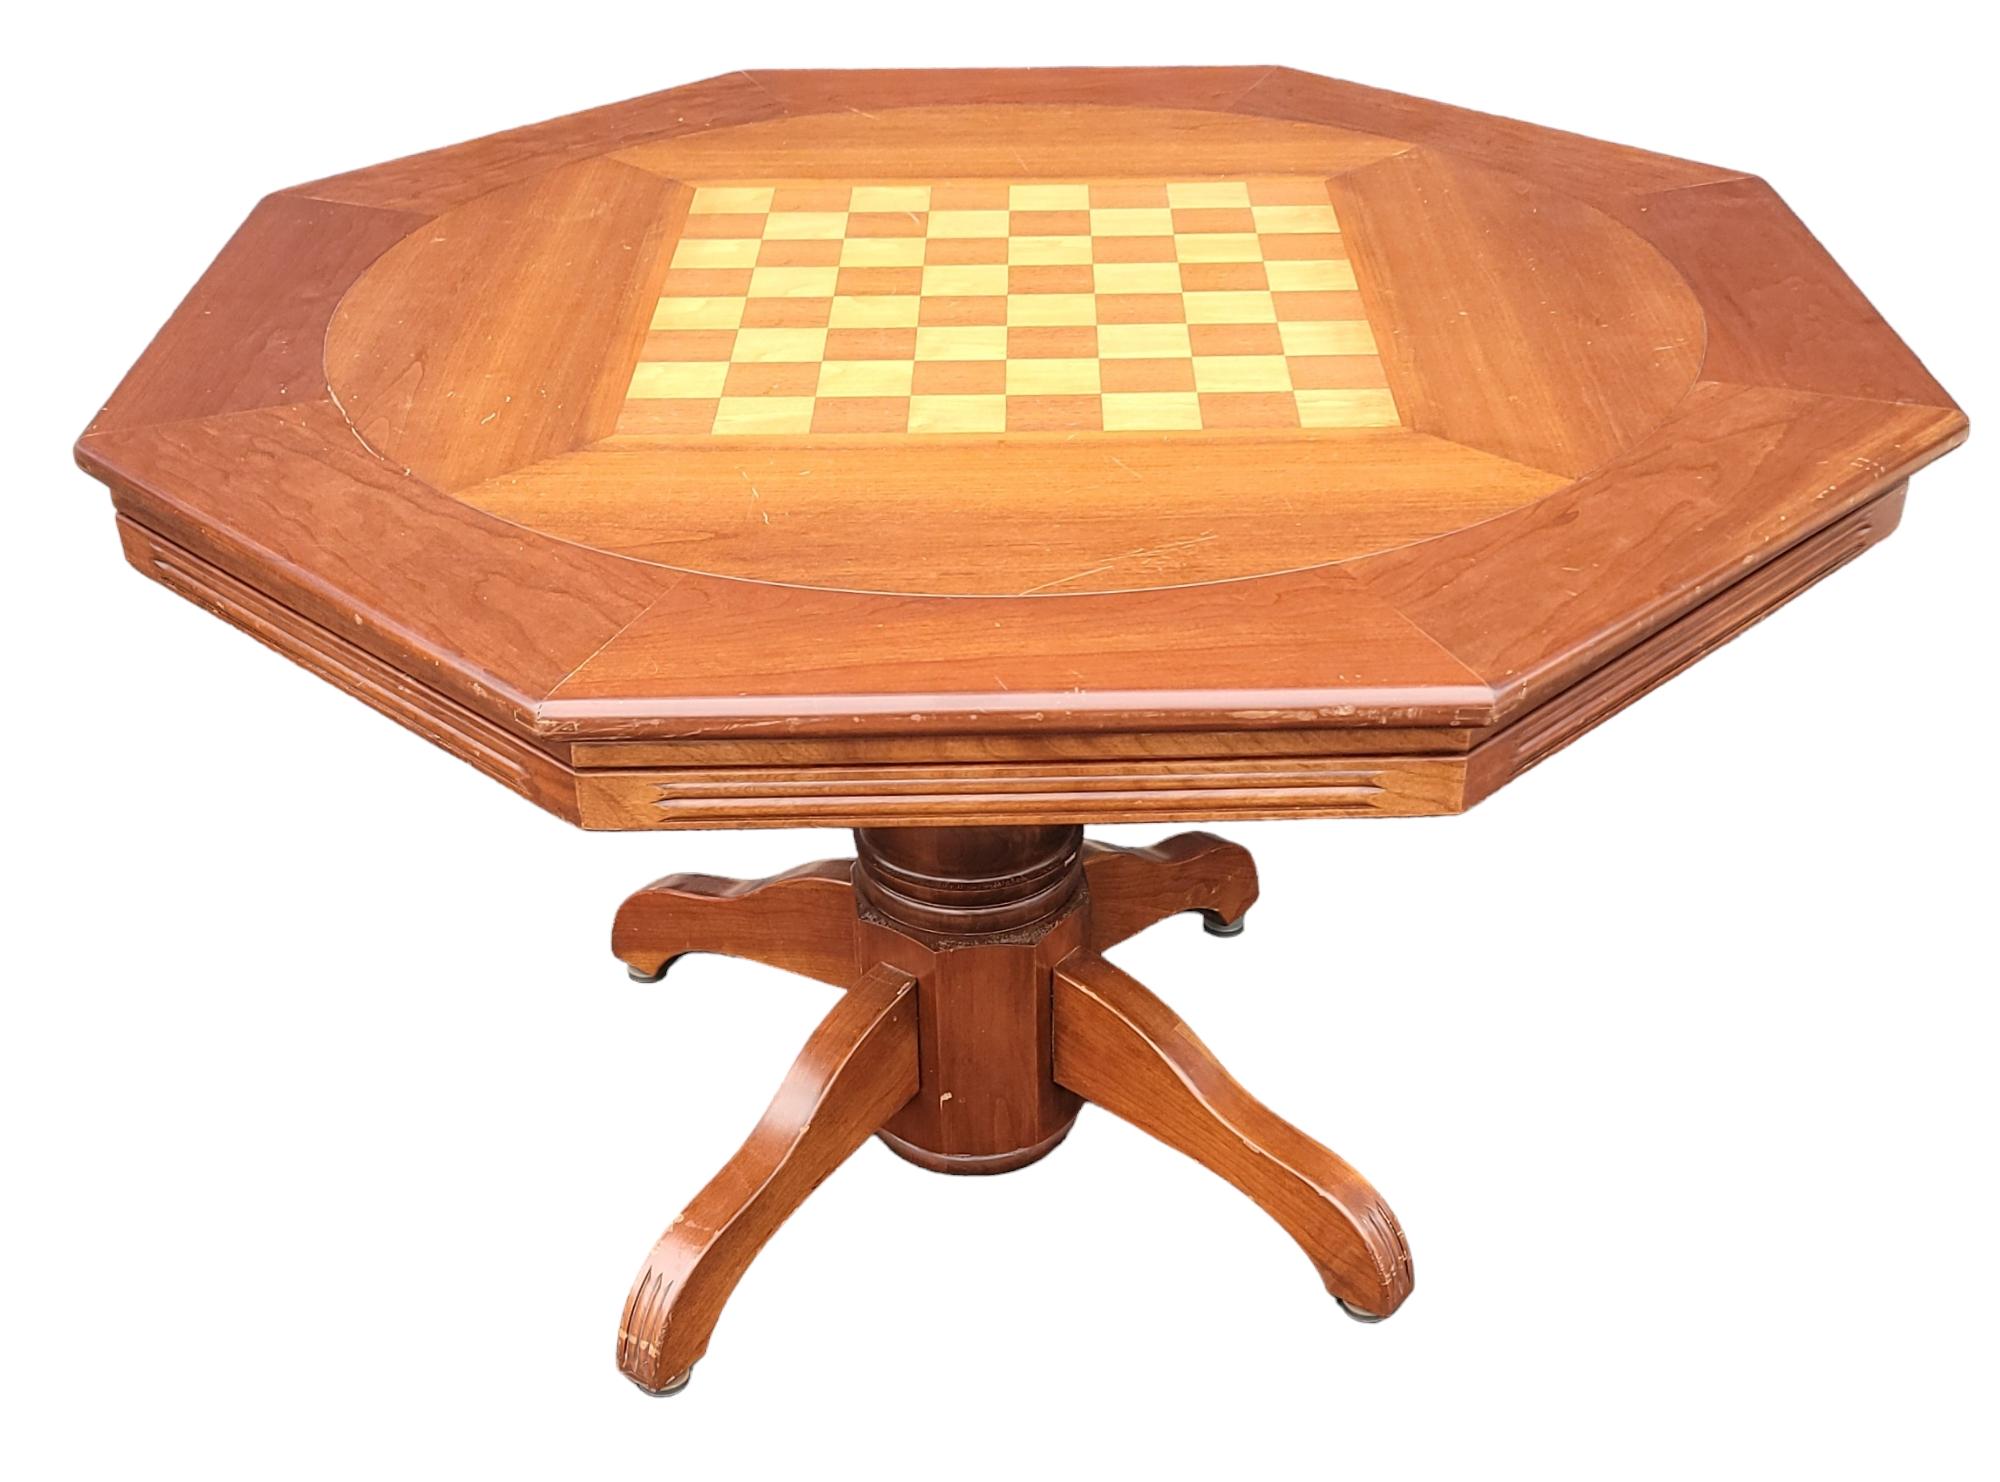 Mid Century Wooden Game Table for cards or chess. This game table may be flipped to provide a different game table. There are pegs to protect the edges from scratching when flipped. There is a red center cloth for a clear center gaming area within